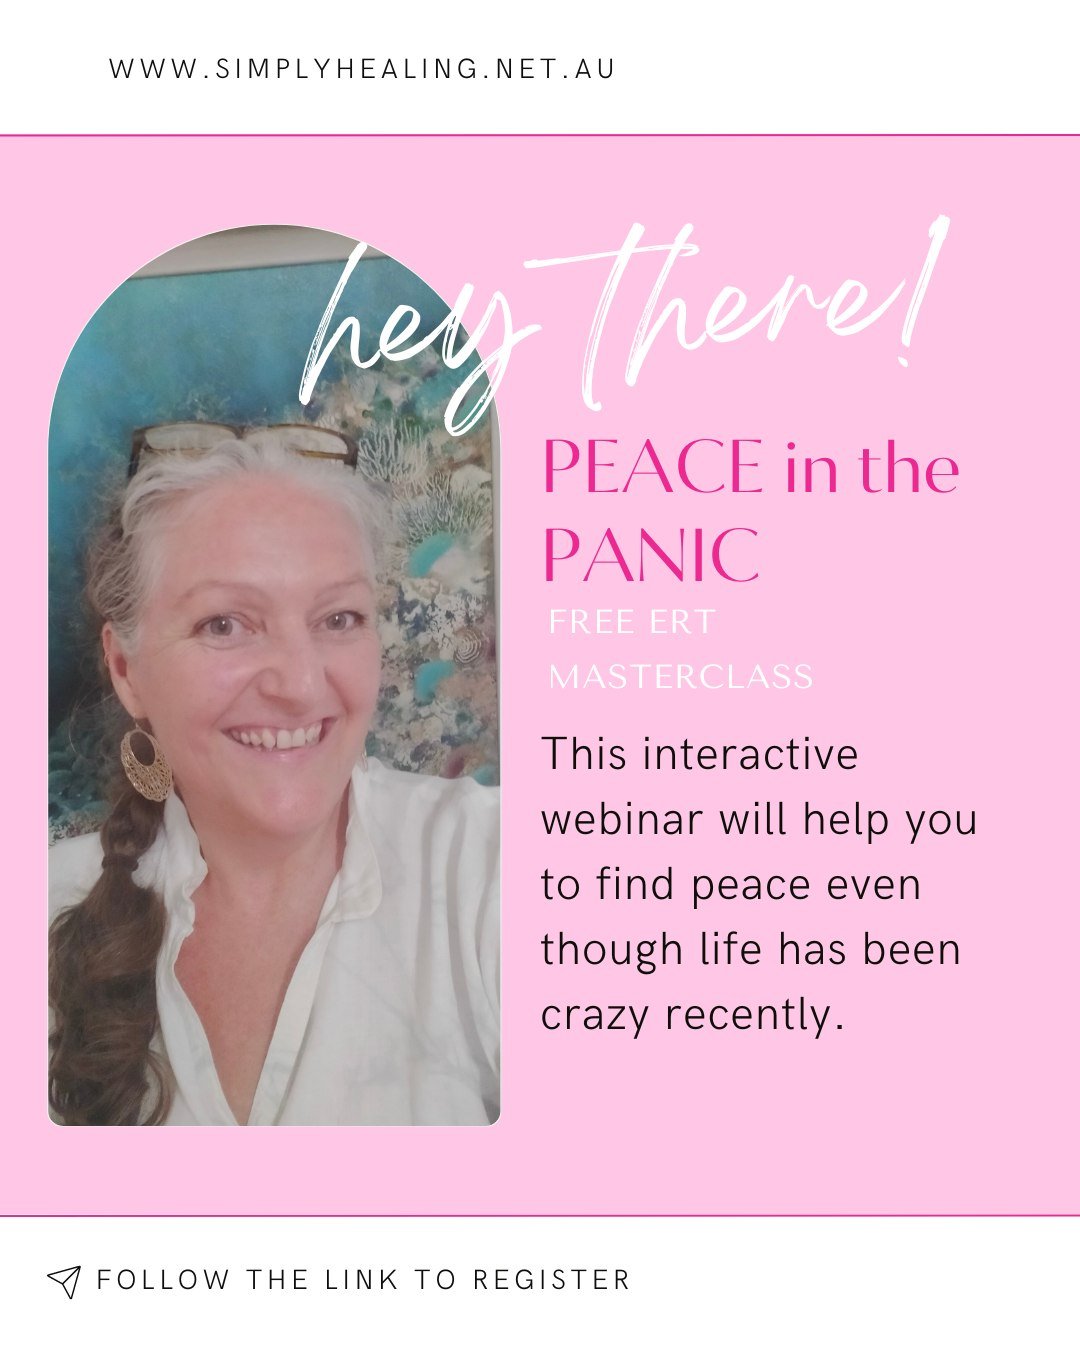 You are 100% going to get sick of me but I promise you won't regret registering for this FREE interactive masterclass. Peace in the Panic was born after the last few months of complete chaos and often panic. I don't read the stars but something has b